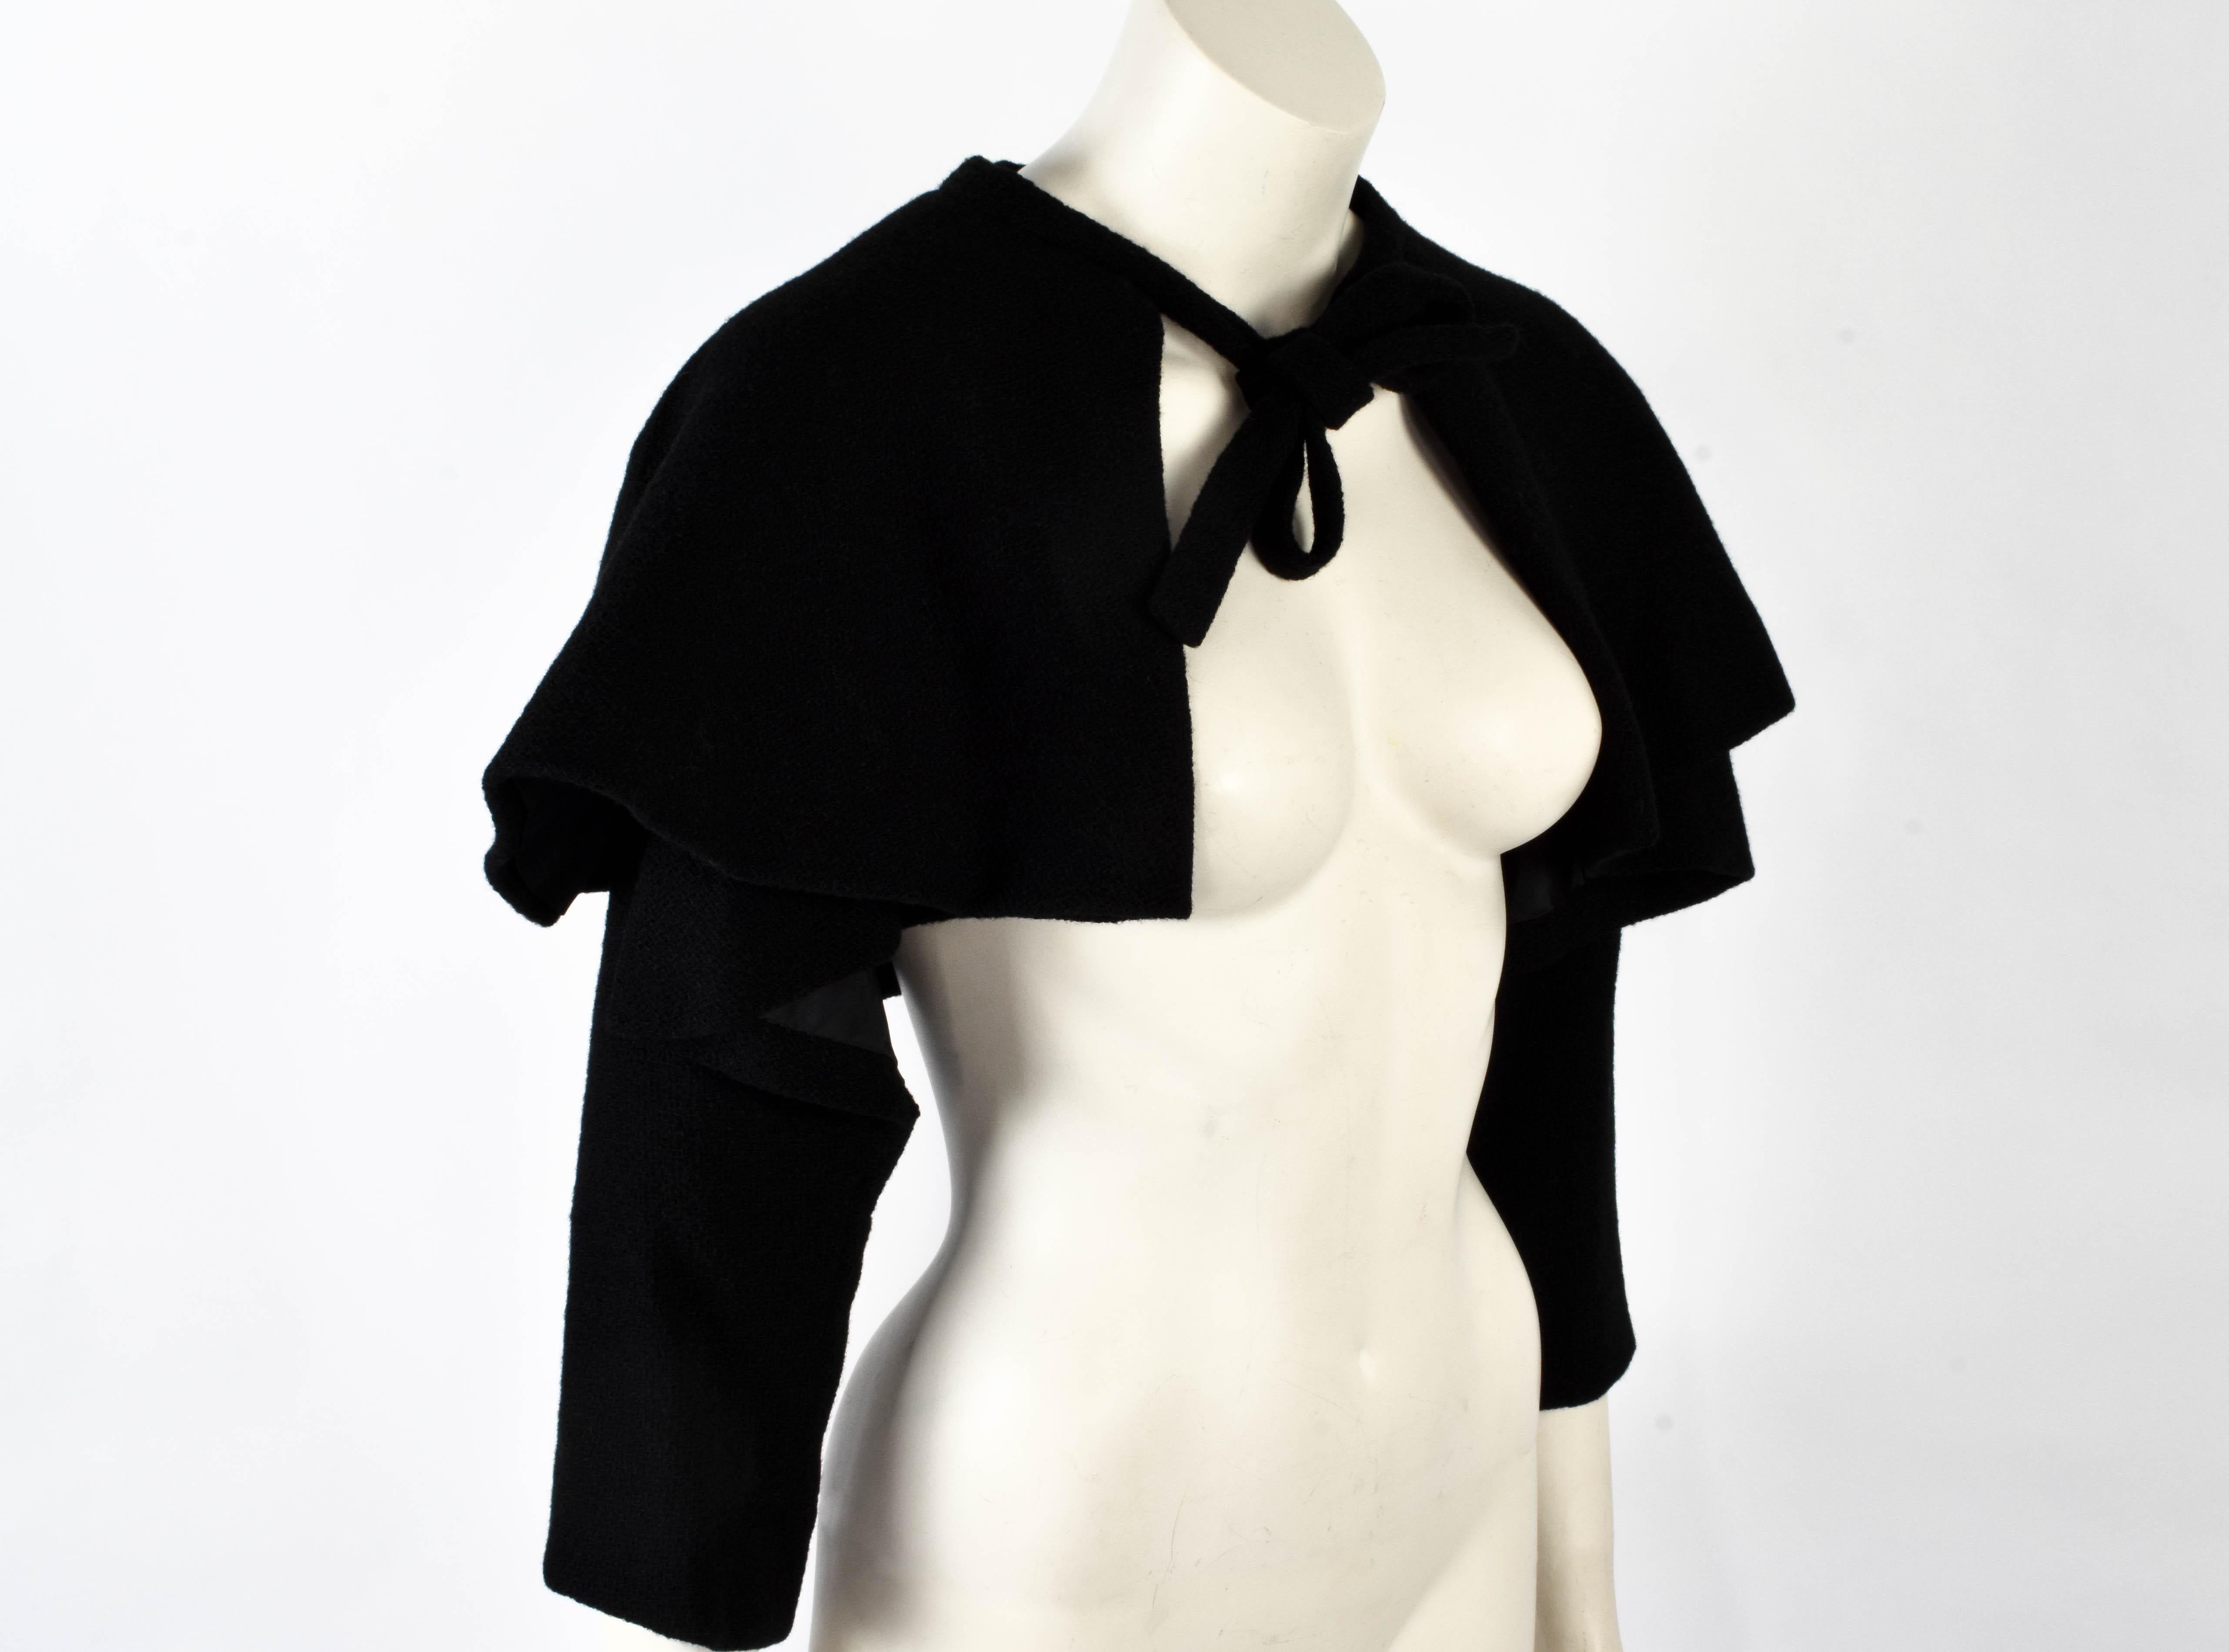 Women's 1950s Cristóbal Balenciaga Haute Couture Black Cape with Sleeves, Numbered 62289